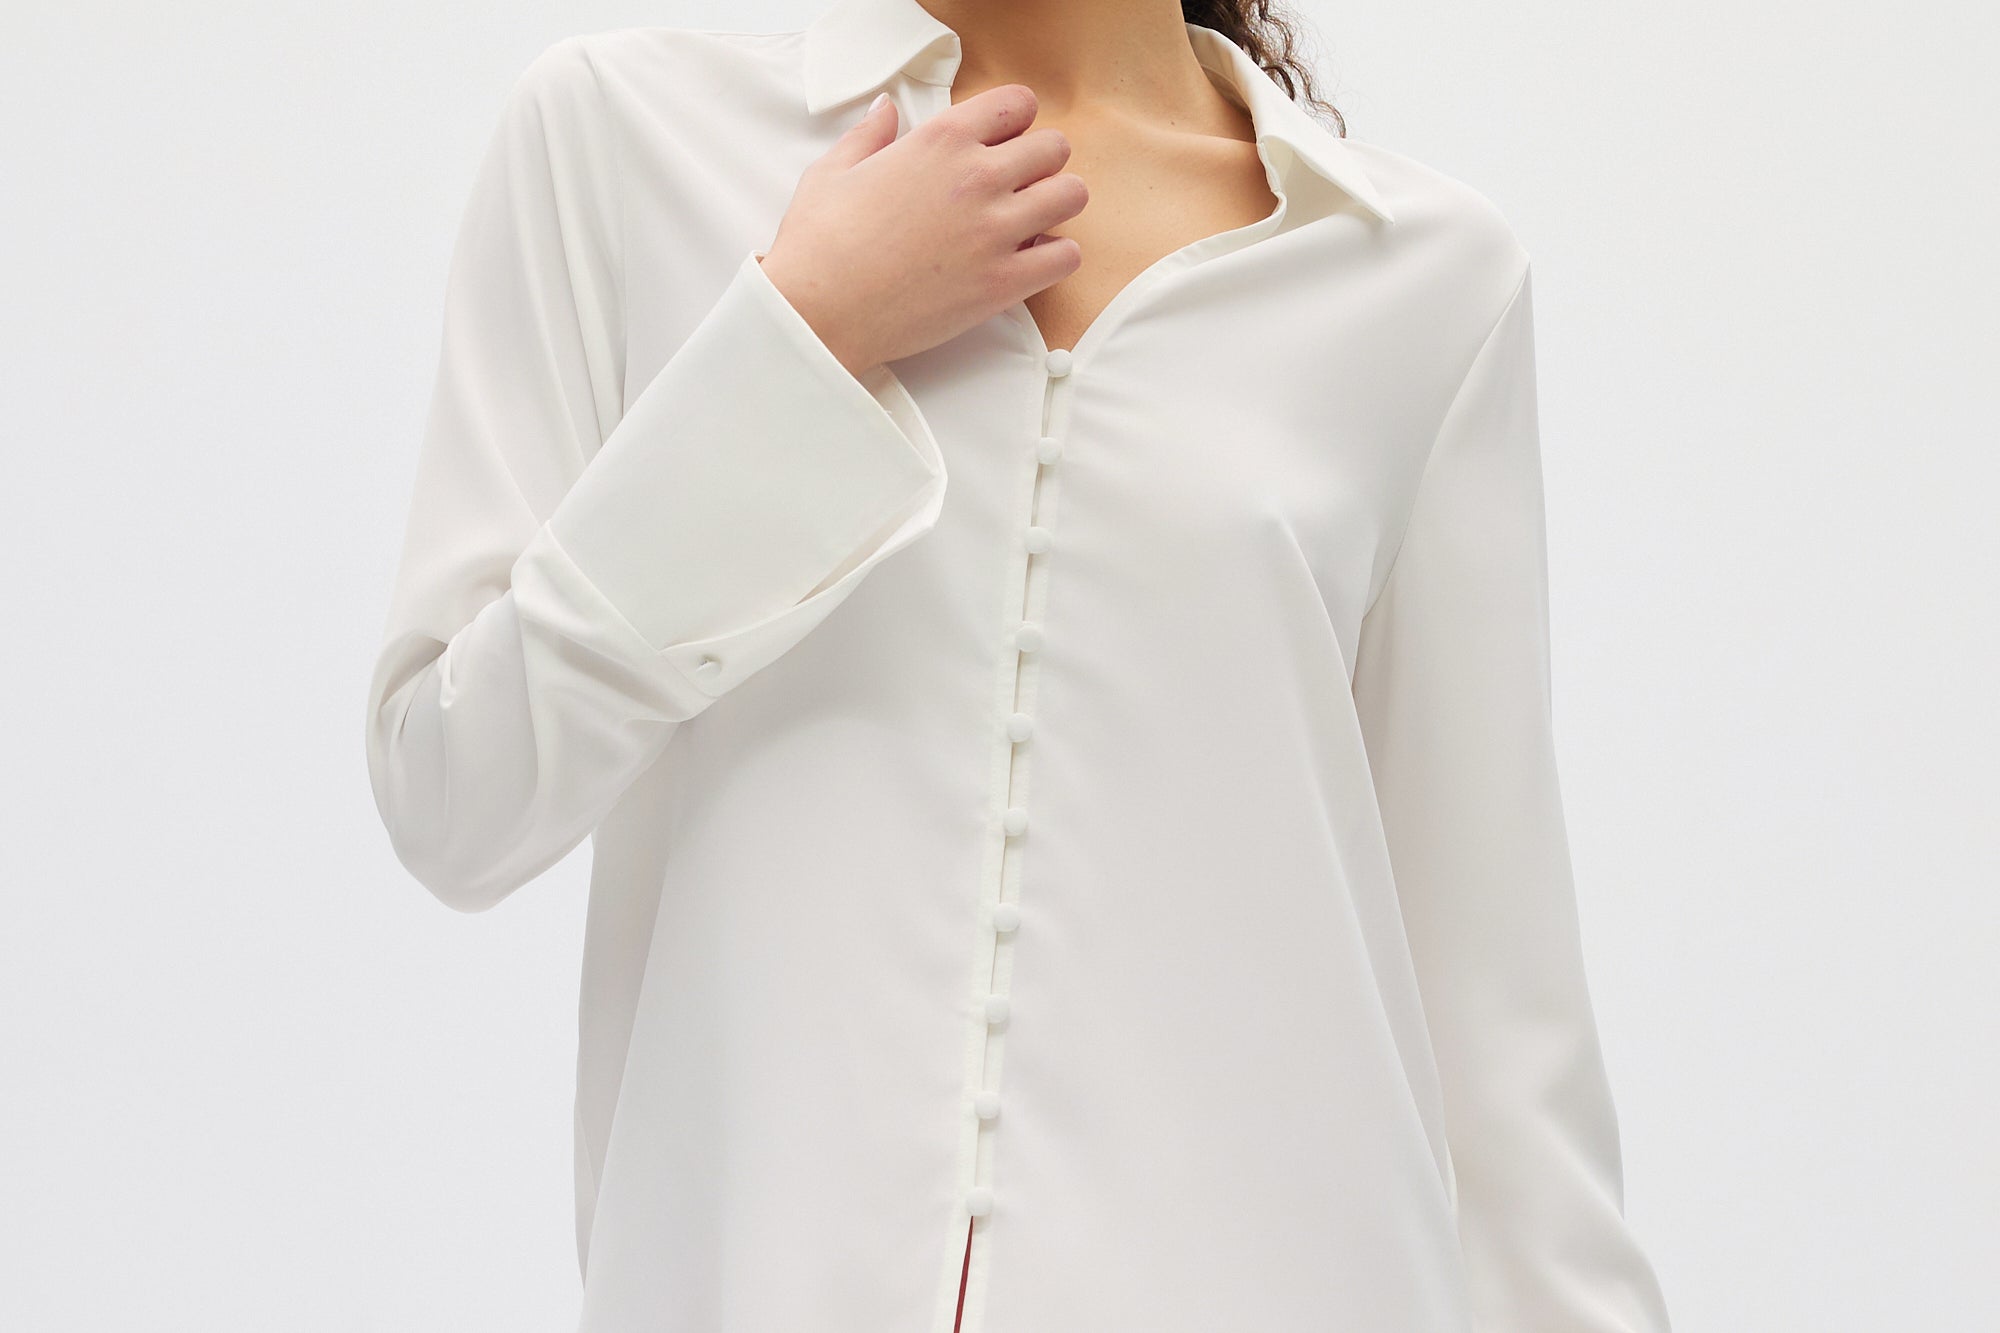 Ivory Long Sleeve Button Blouse front 2